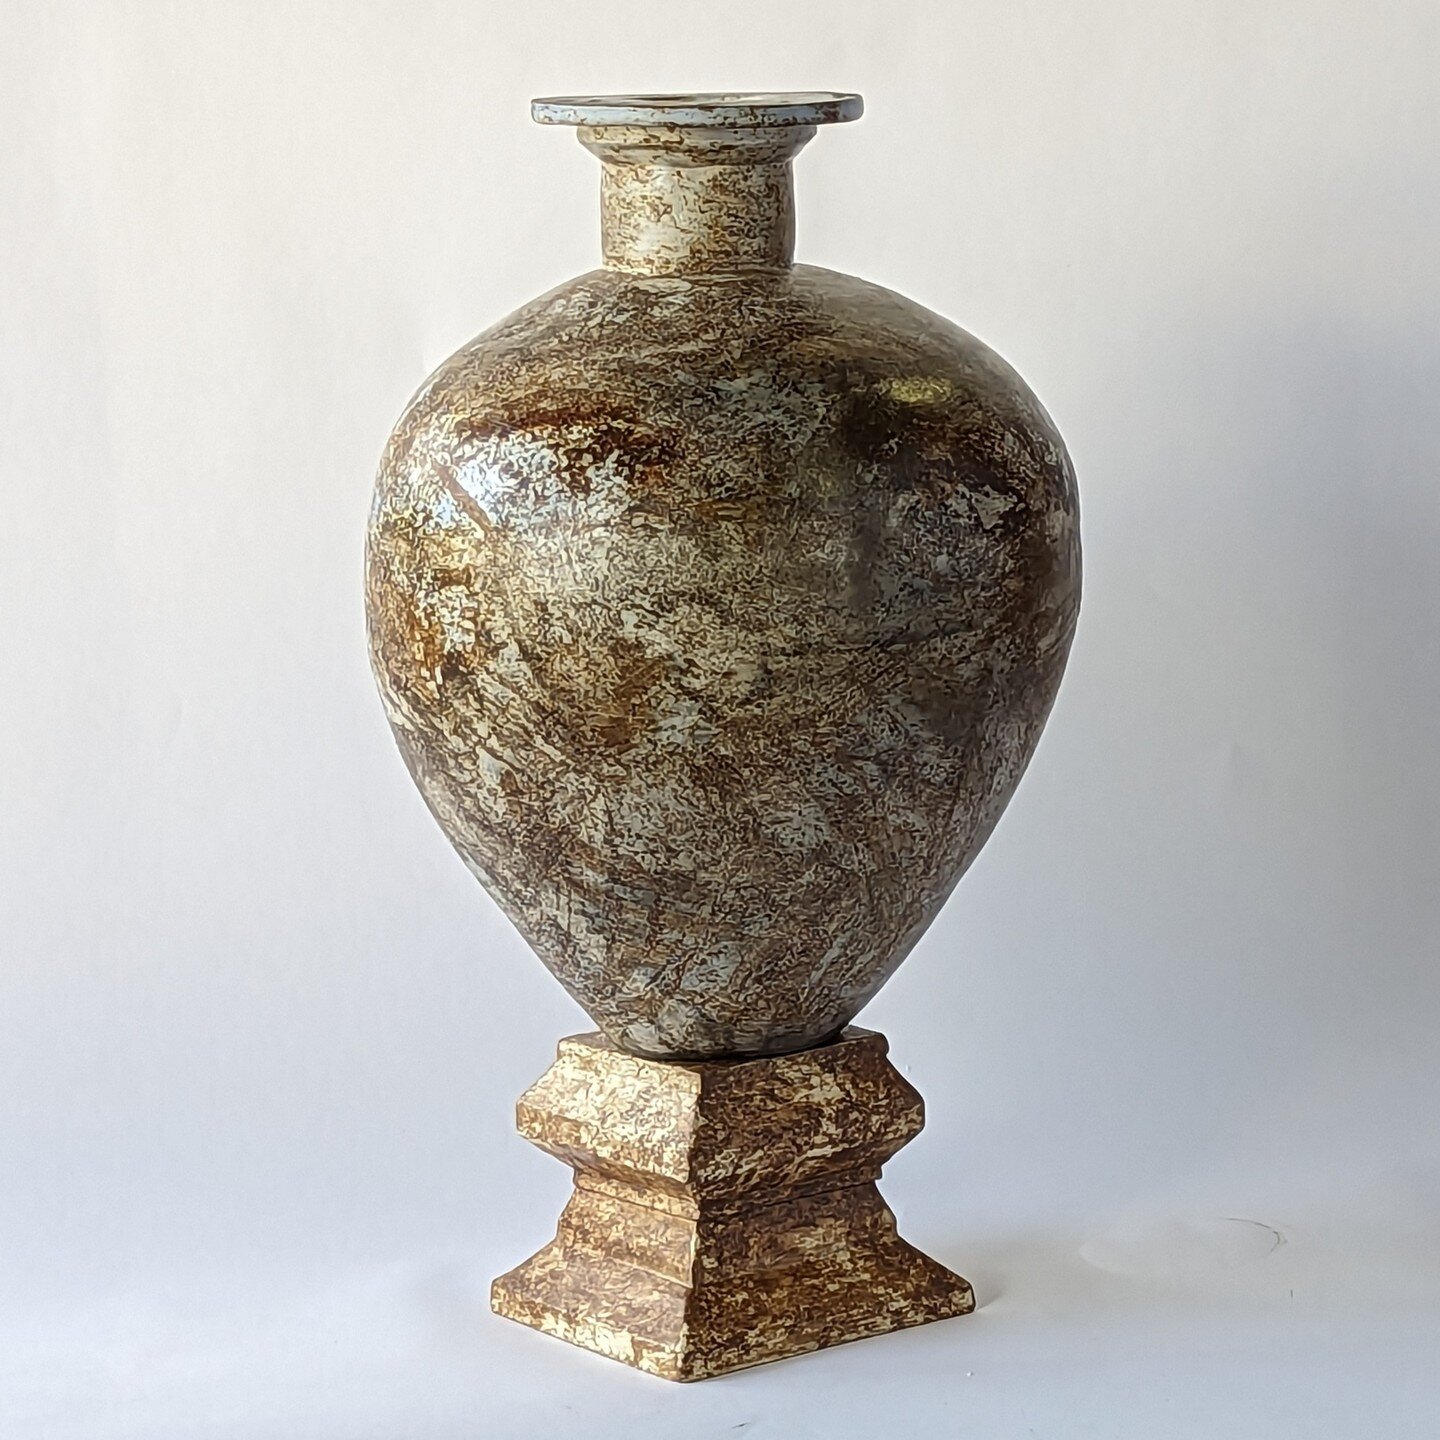 So grateful that &lsquo;Weathered&rsquo; is a finalist for the @ceramicartsqld 2023 Siliceous Award for Ceramic Excellence. 

The exhibition opens tonight and runs to 5 November 2023.

Venue: Ipswich Community Gallery.

All work in the exhibition is 